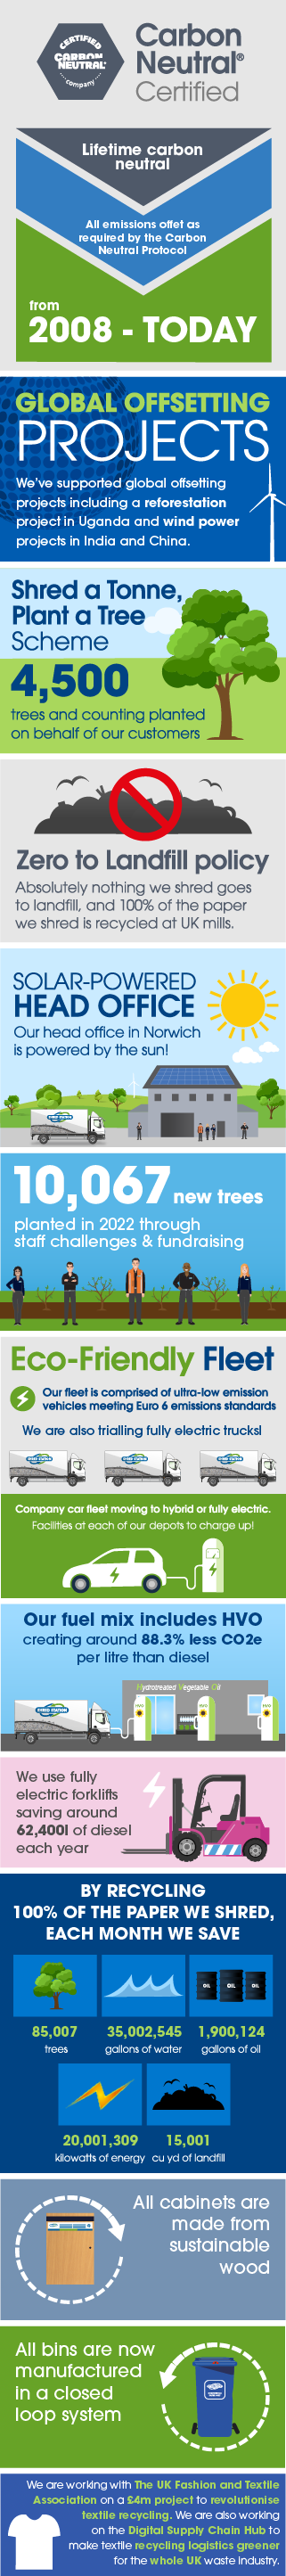 Carbon offset infographic - small